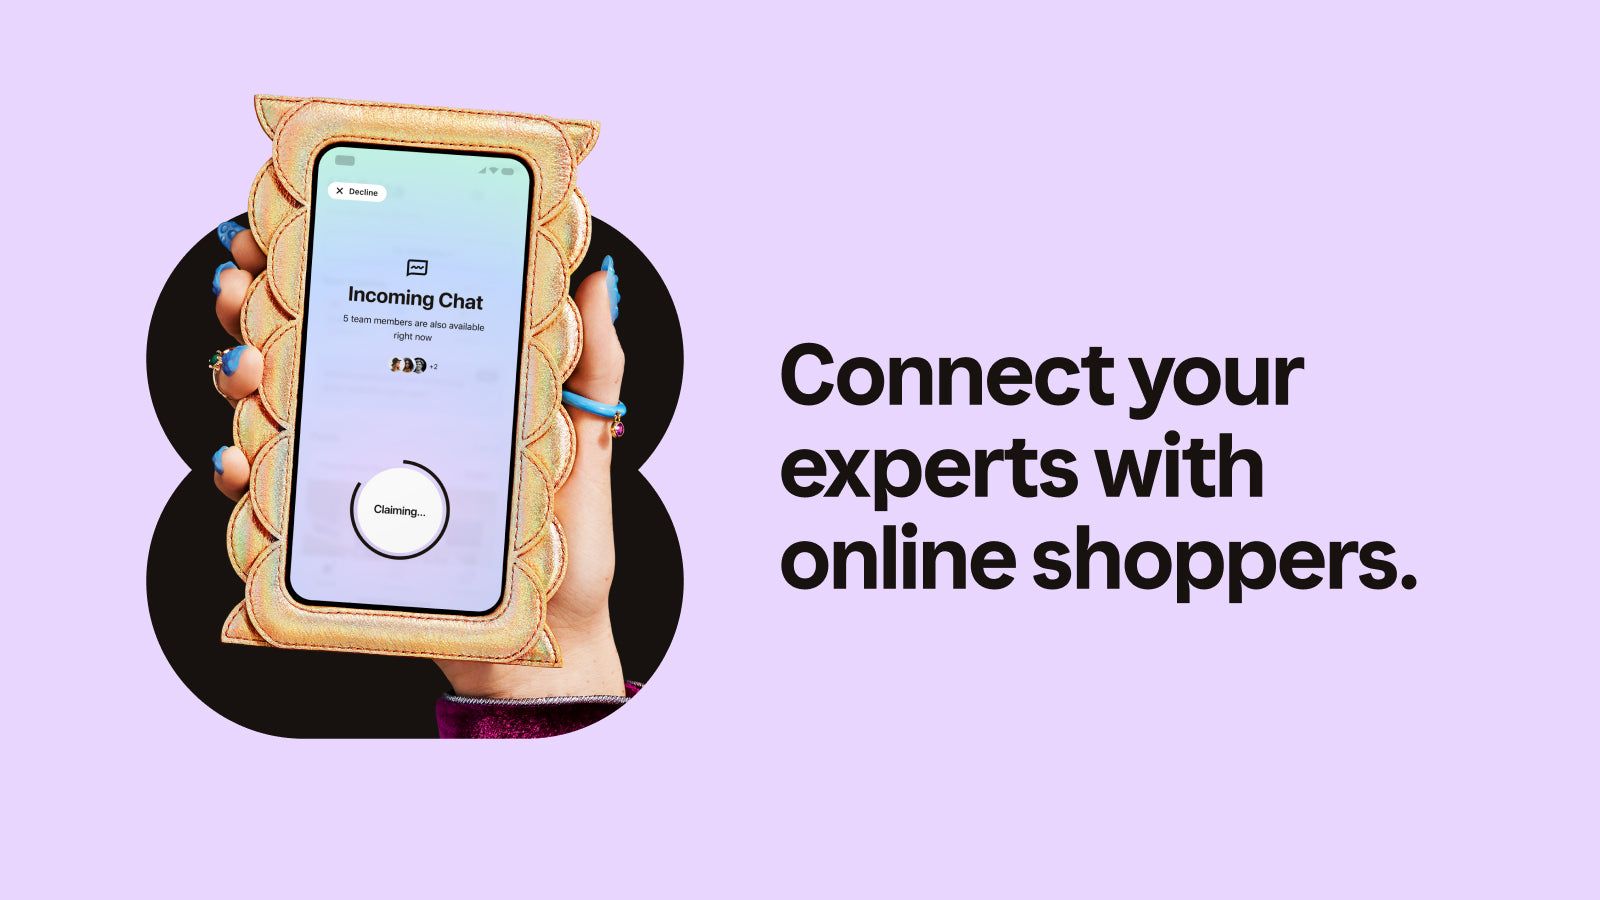 Connect your experts with online shoppers